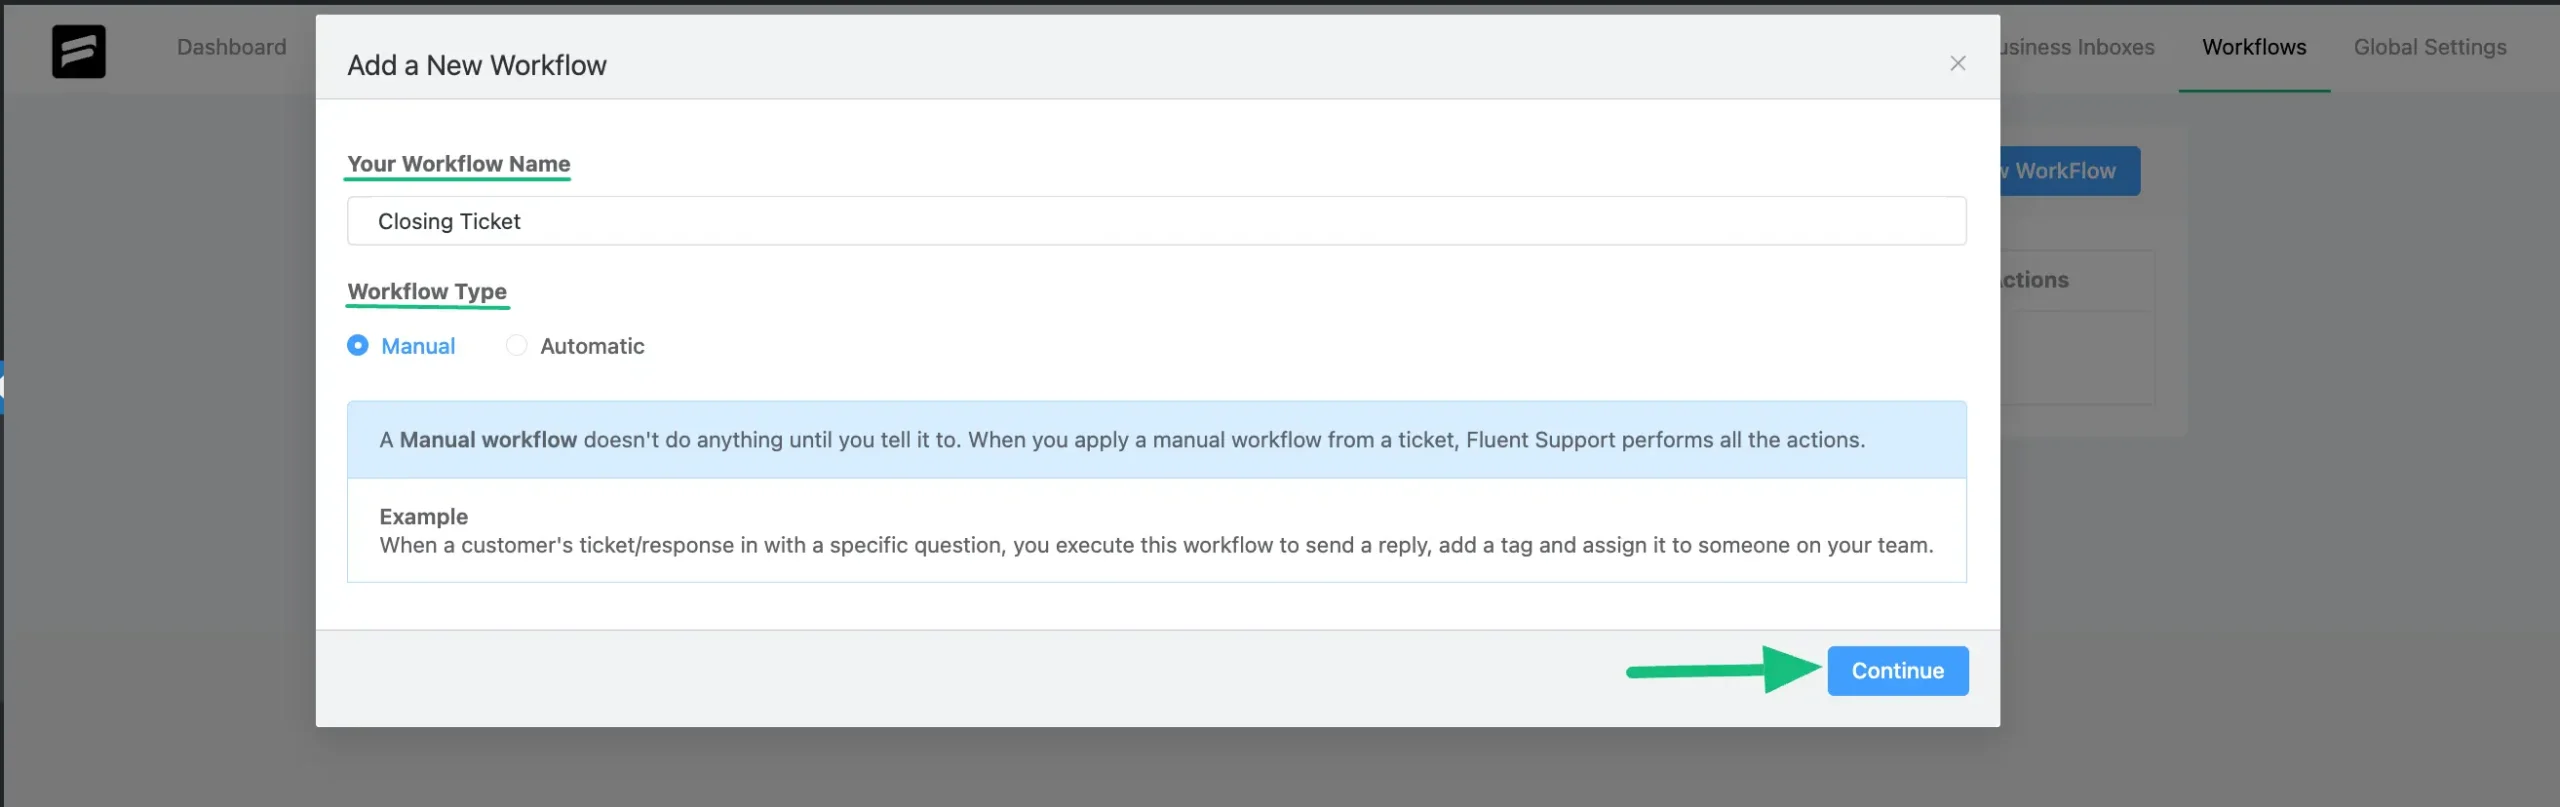 Popup page for adding a new workflow